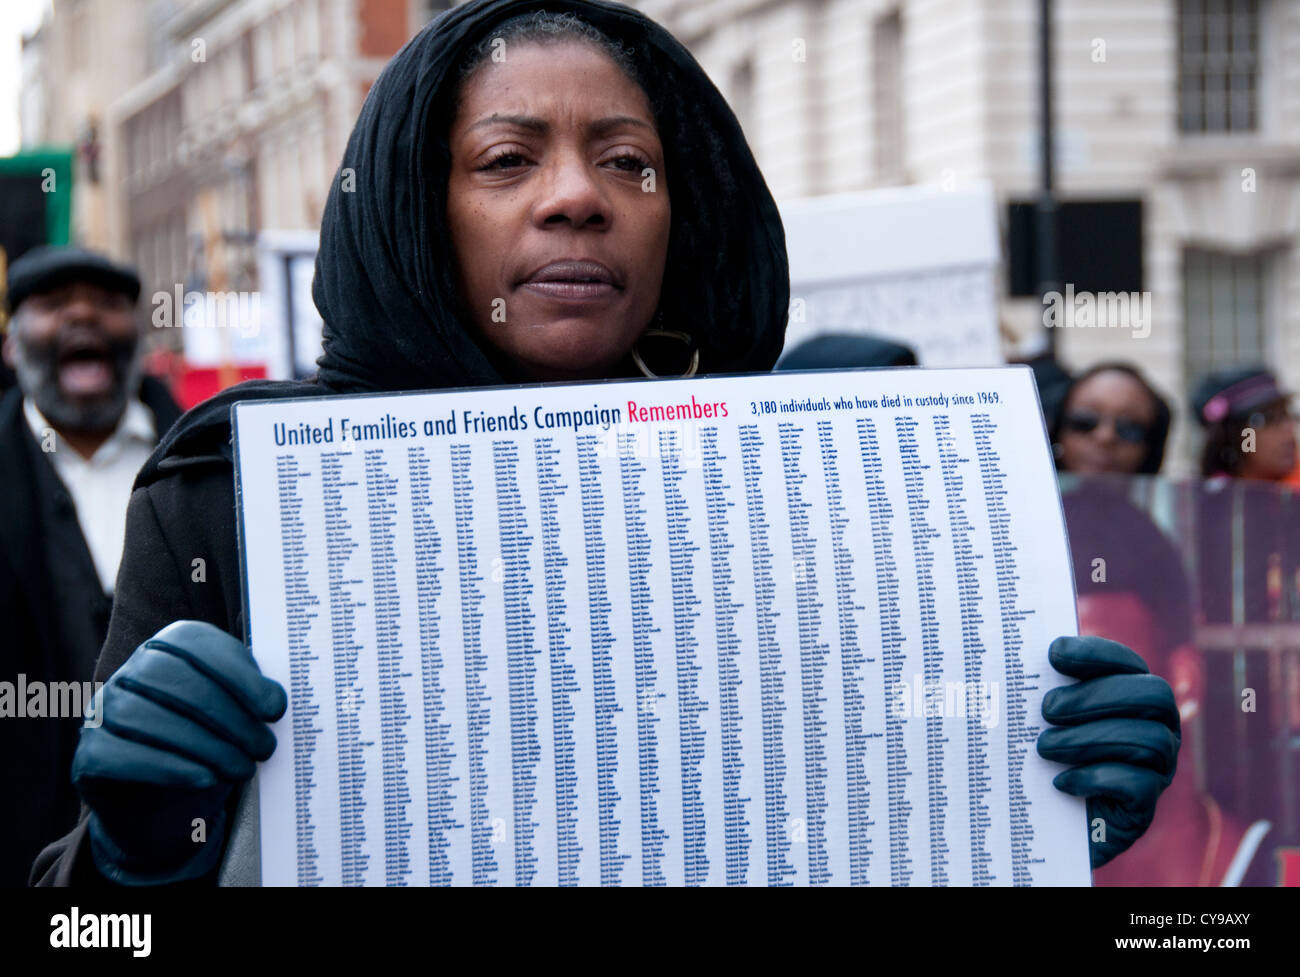 Marcia Rigg sister of Sean Rigg who died in custody 2008  holding names of those killed in police custody since 1969  2012 Londo Stock Photo